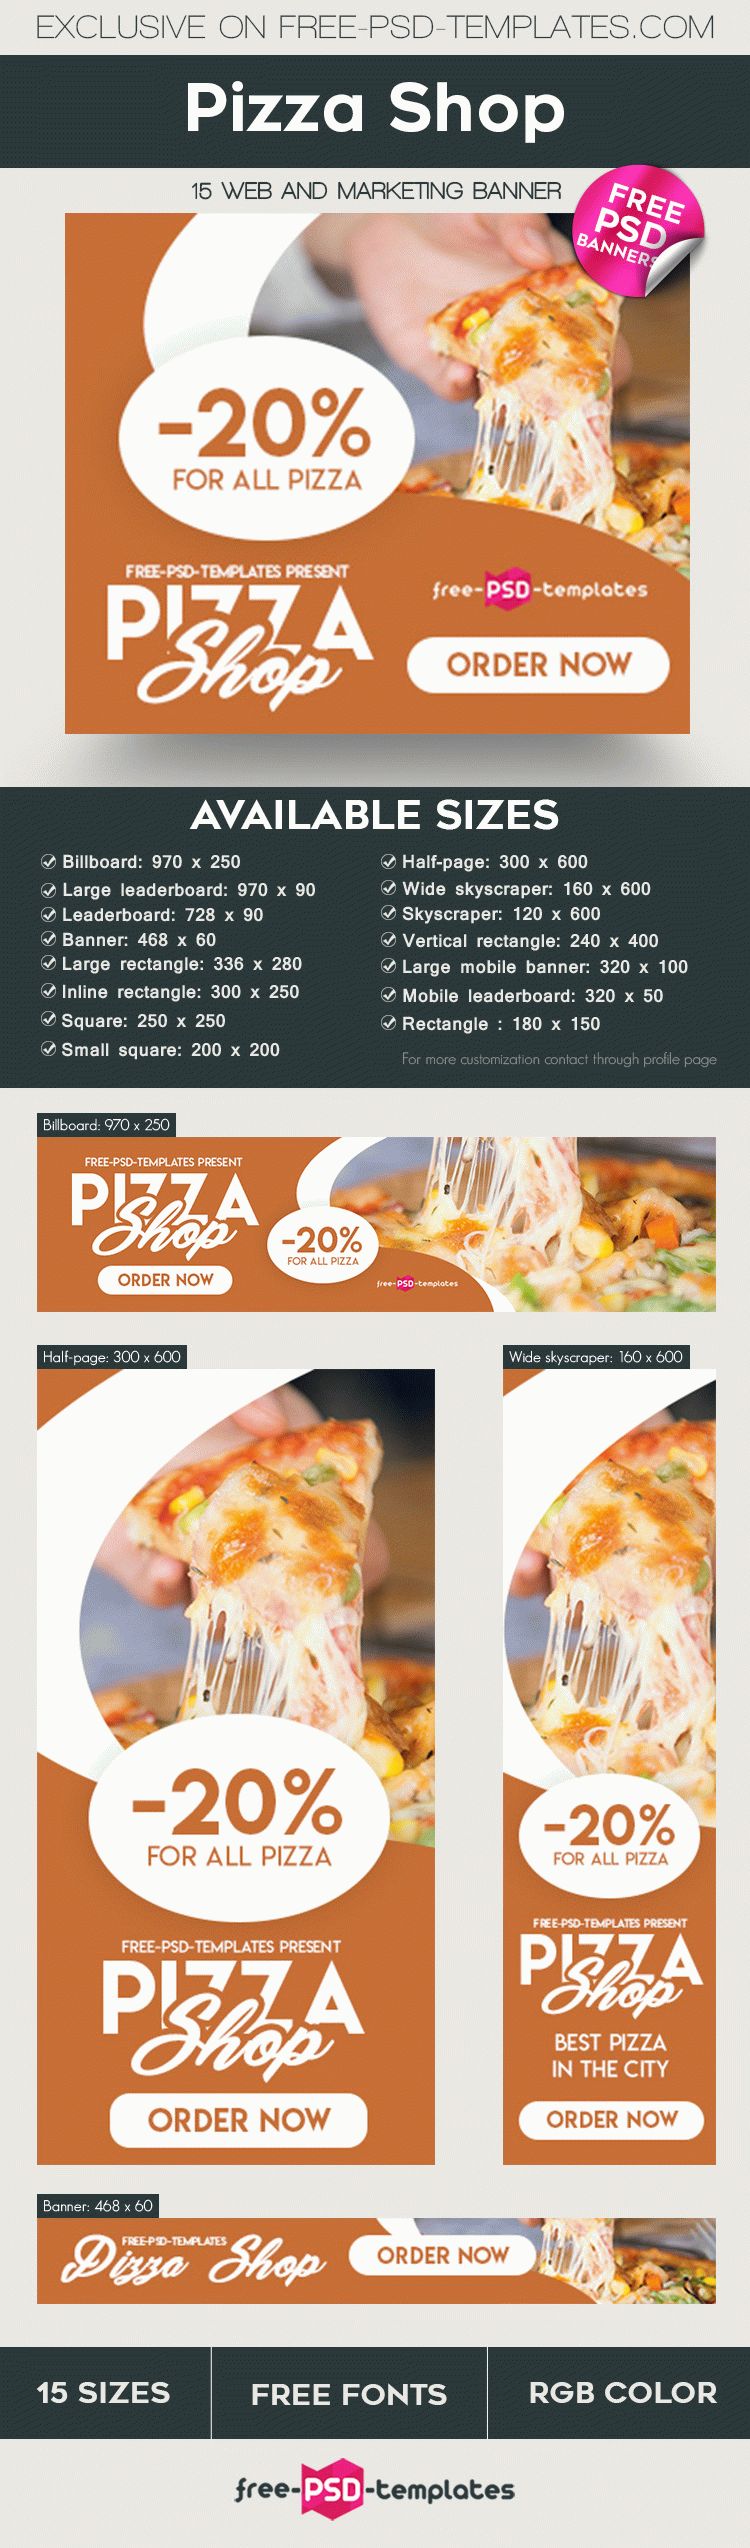 15-free-pizza-shop-banners-collection-in-psd-free-psd-templates